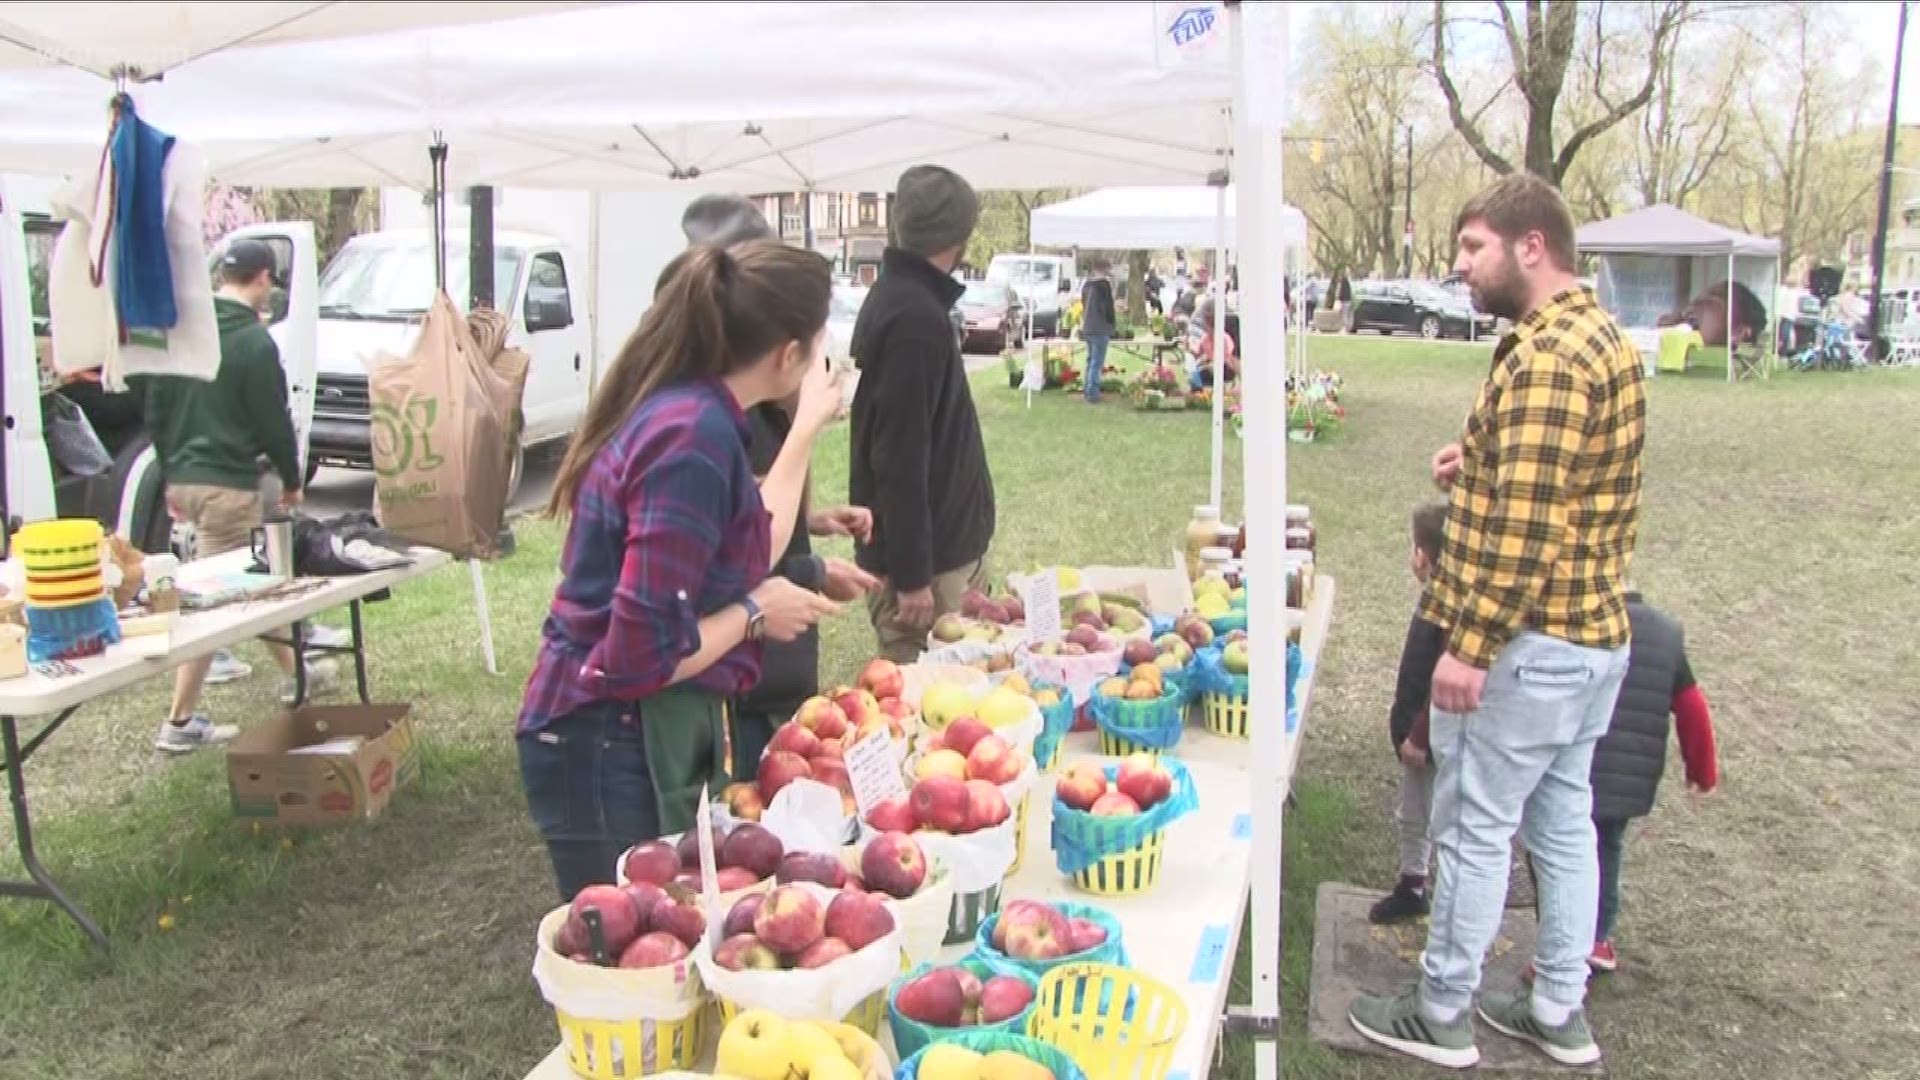 This is the 21st year for the market which runs Saturdays from 8 a.m. to 1 p.m. on Elmwood Avenue near Bidwell Parkway.